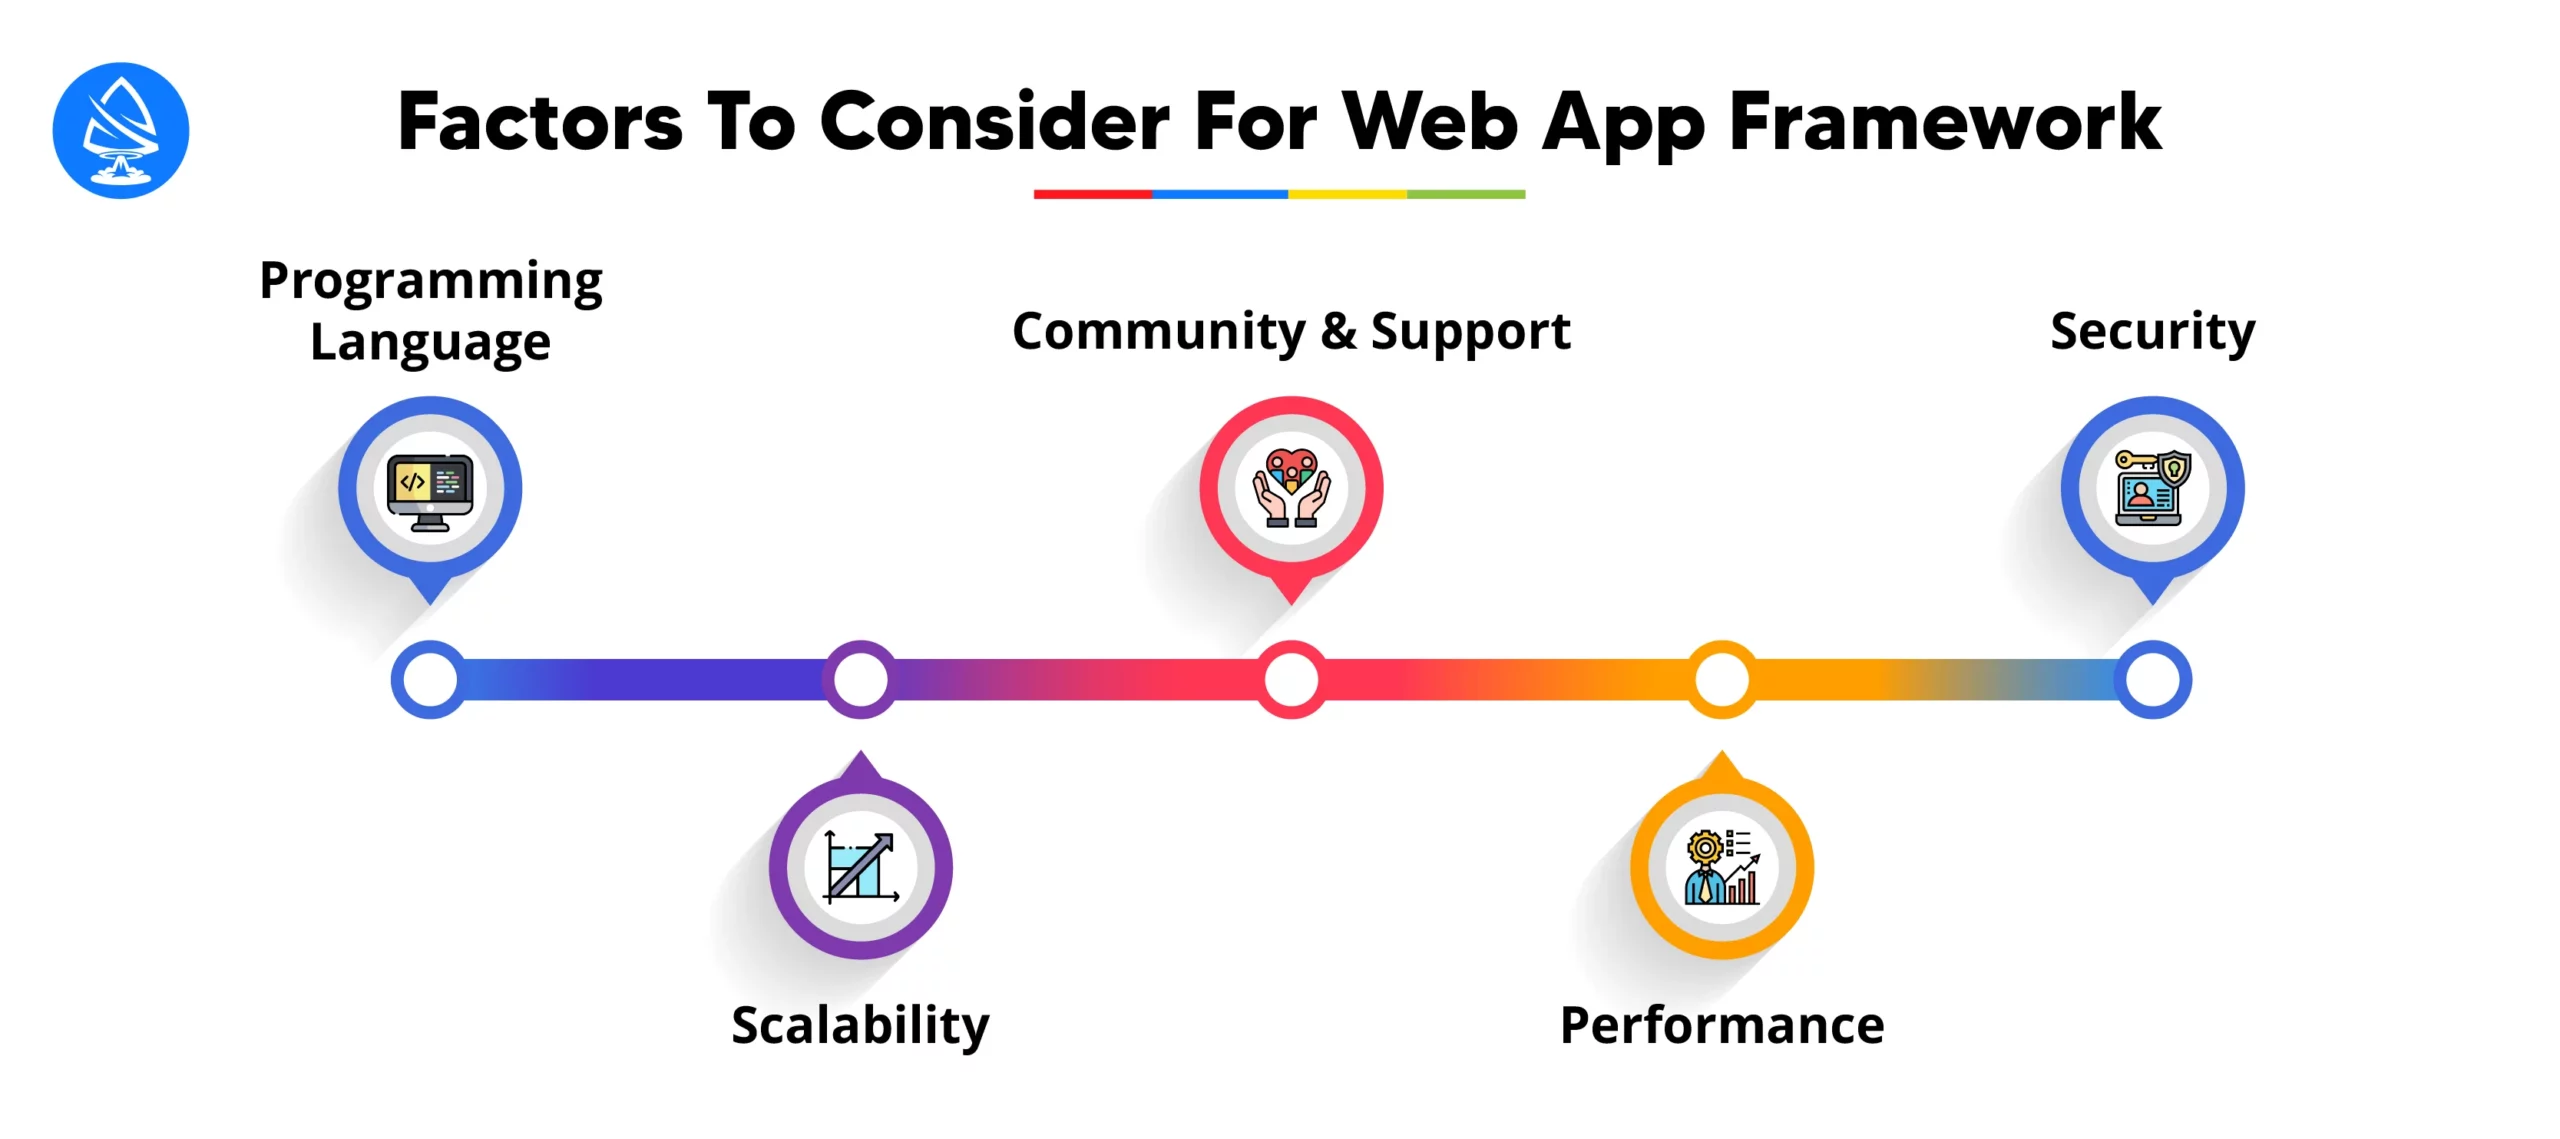 Factors to Consider When Selecting a Web App Framework